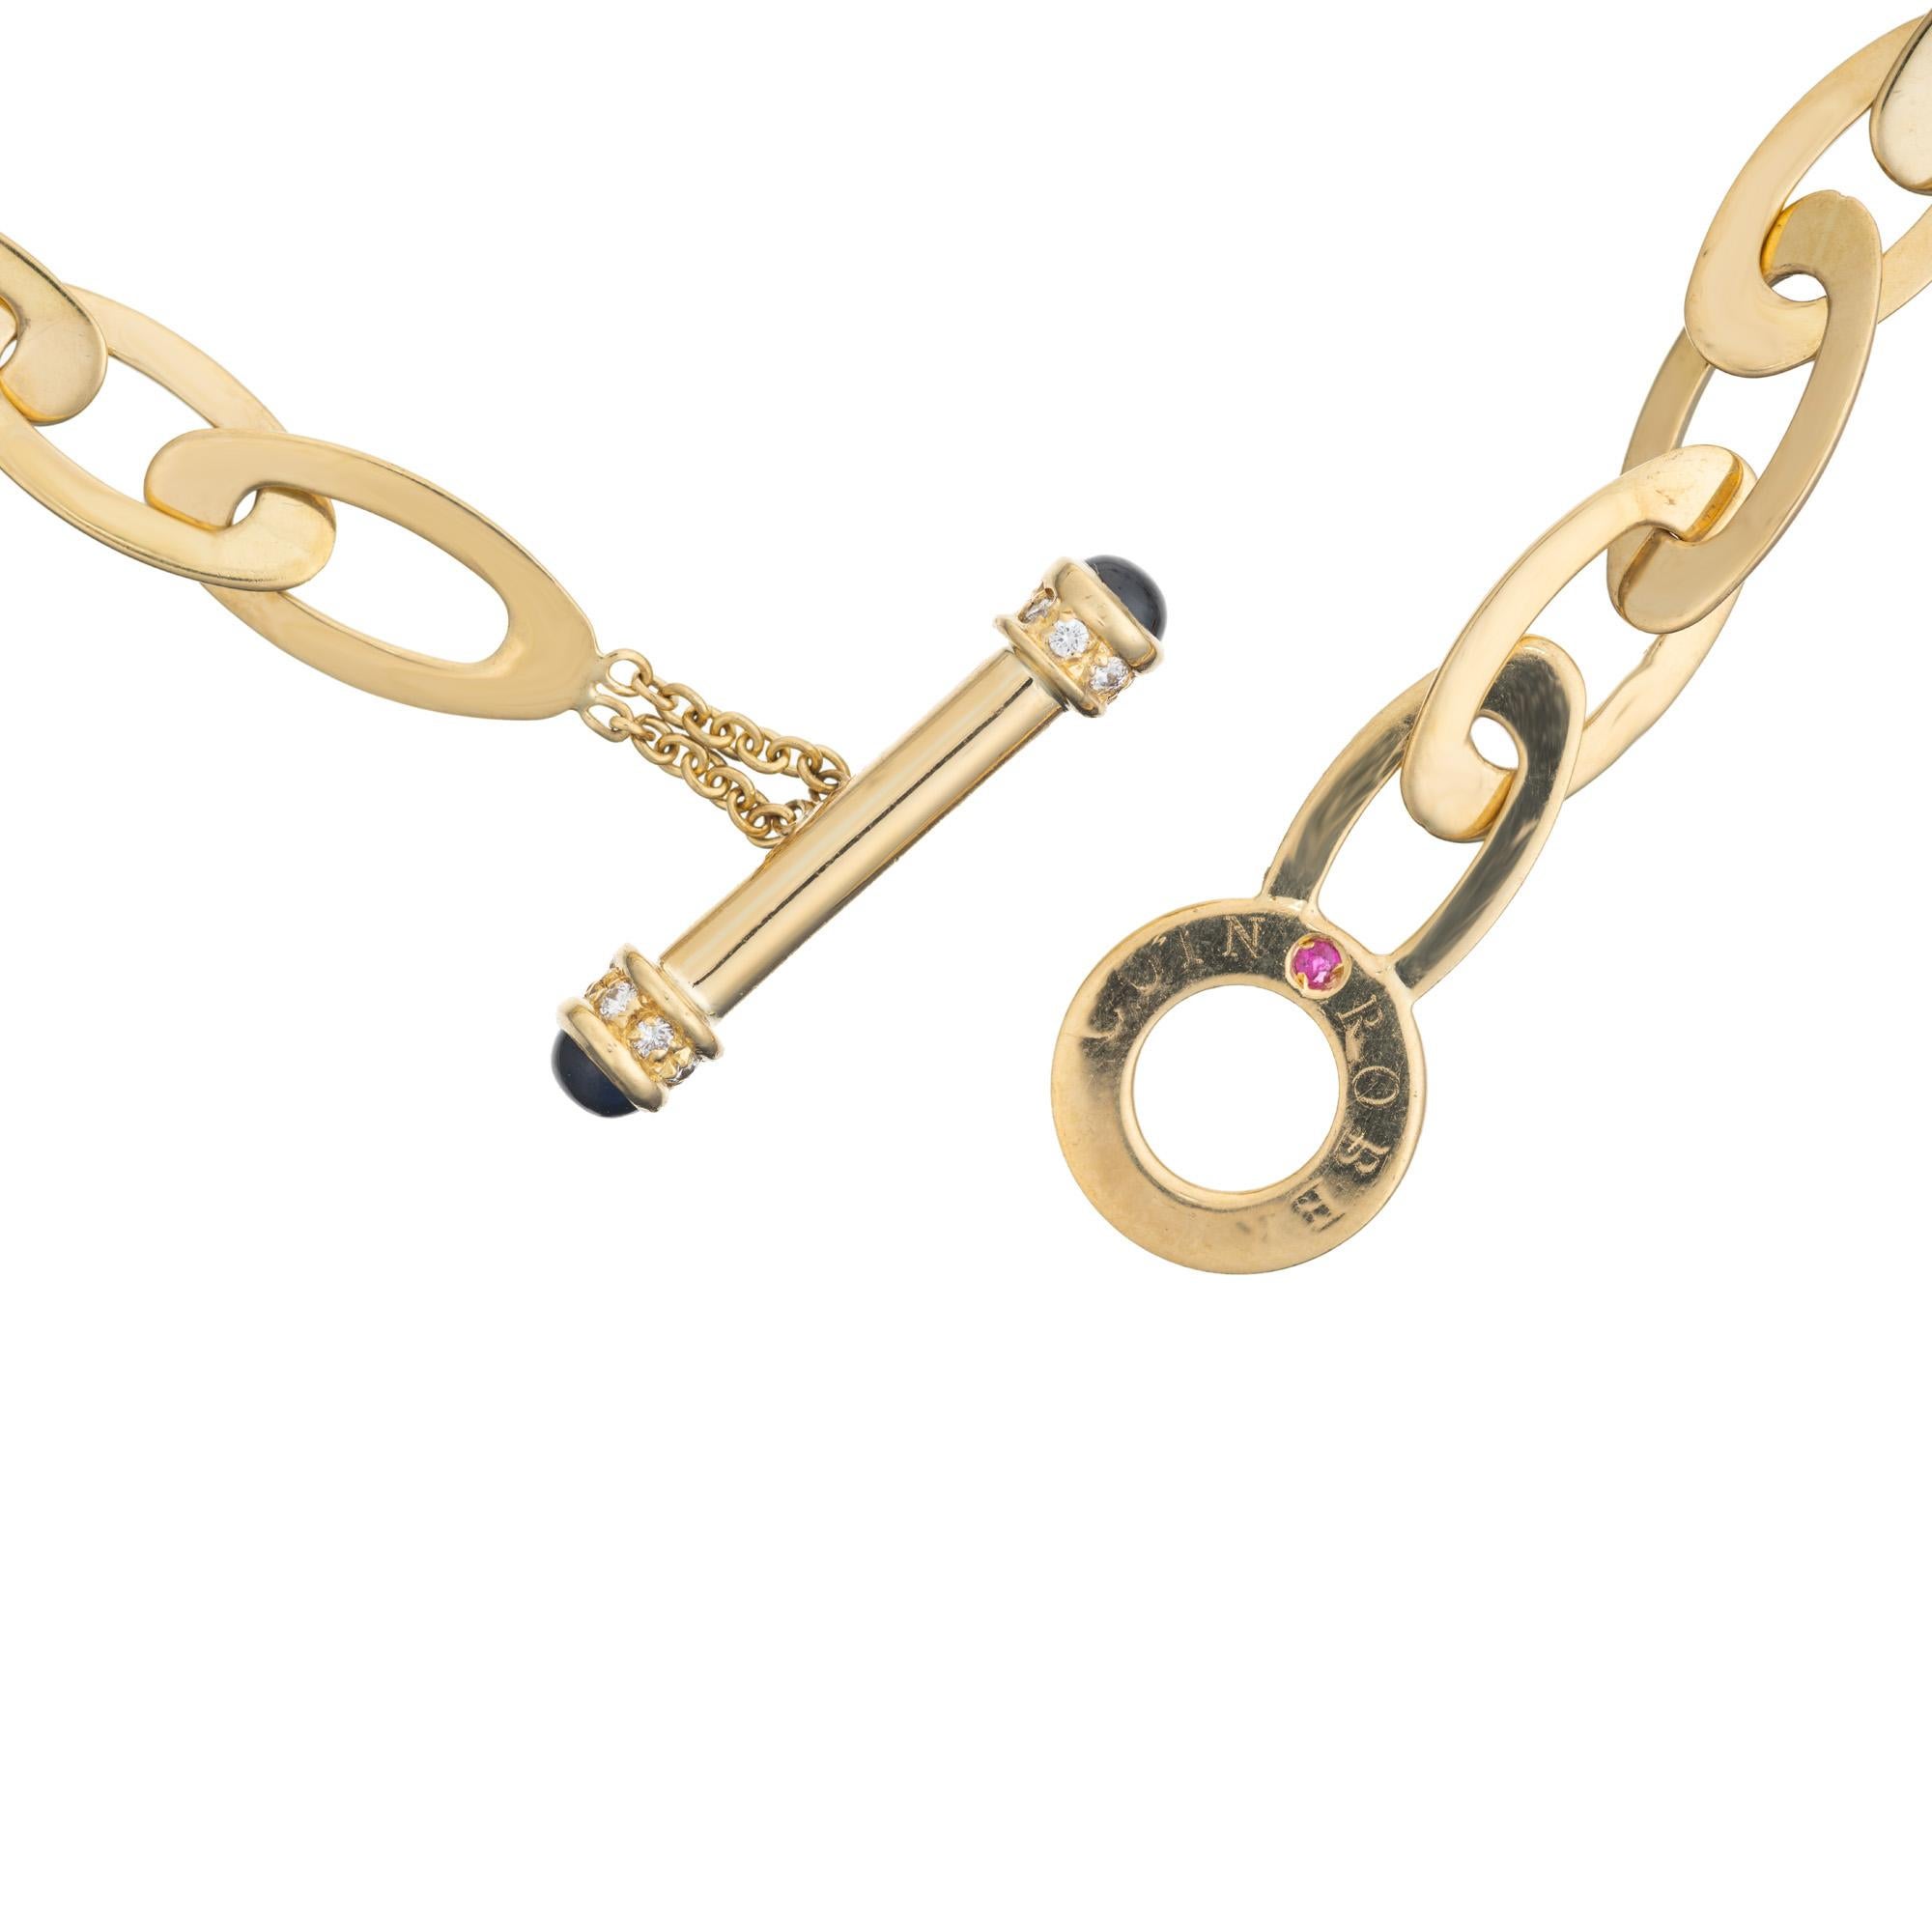 Designer chic oval link gold necklace. This Roberto Coin, link necklaces has a total length of 32 inches, allowing to worn at that length or in a multi chain fashion. The highly polished elongated 18k yellow gold oval links alternate in size. The